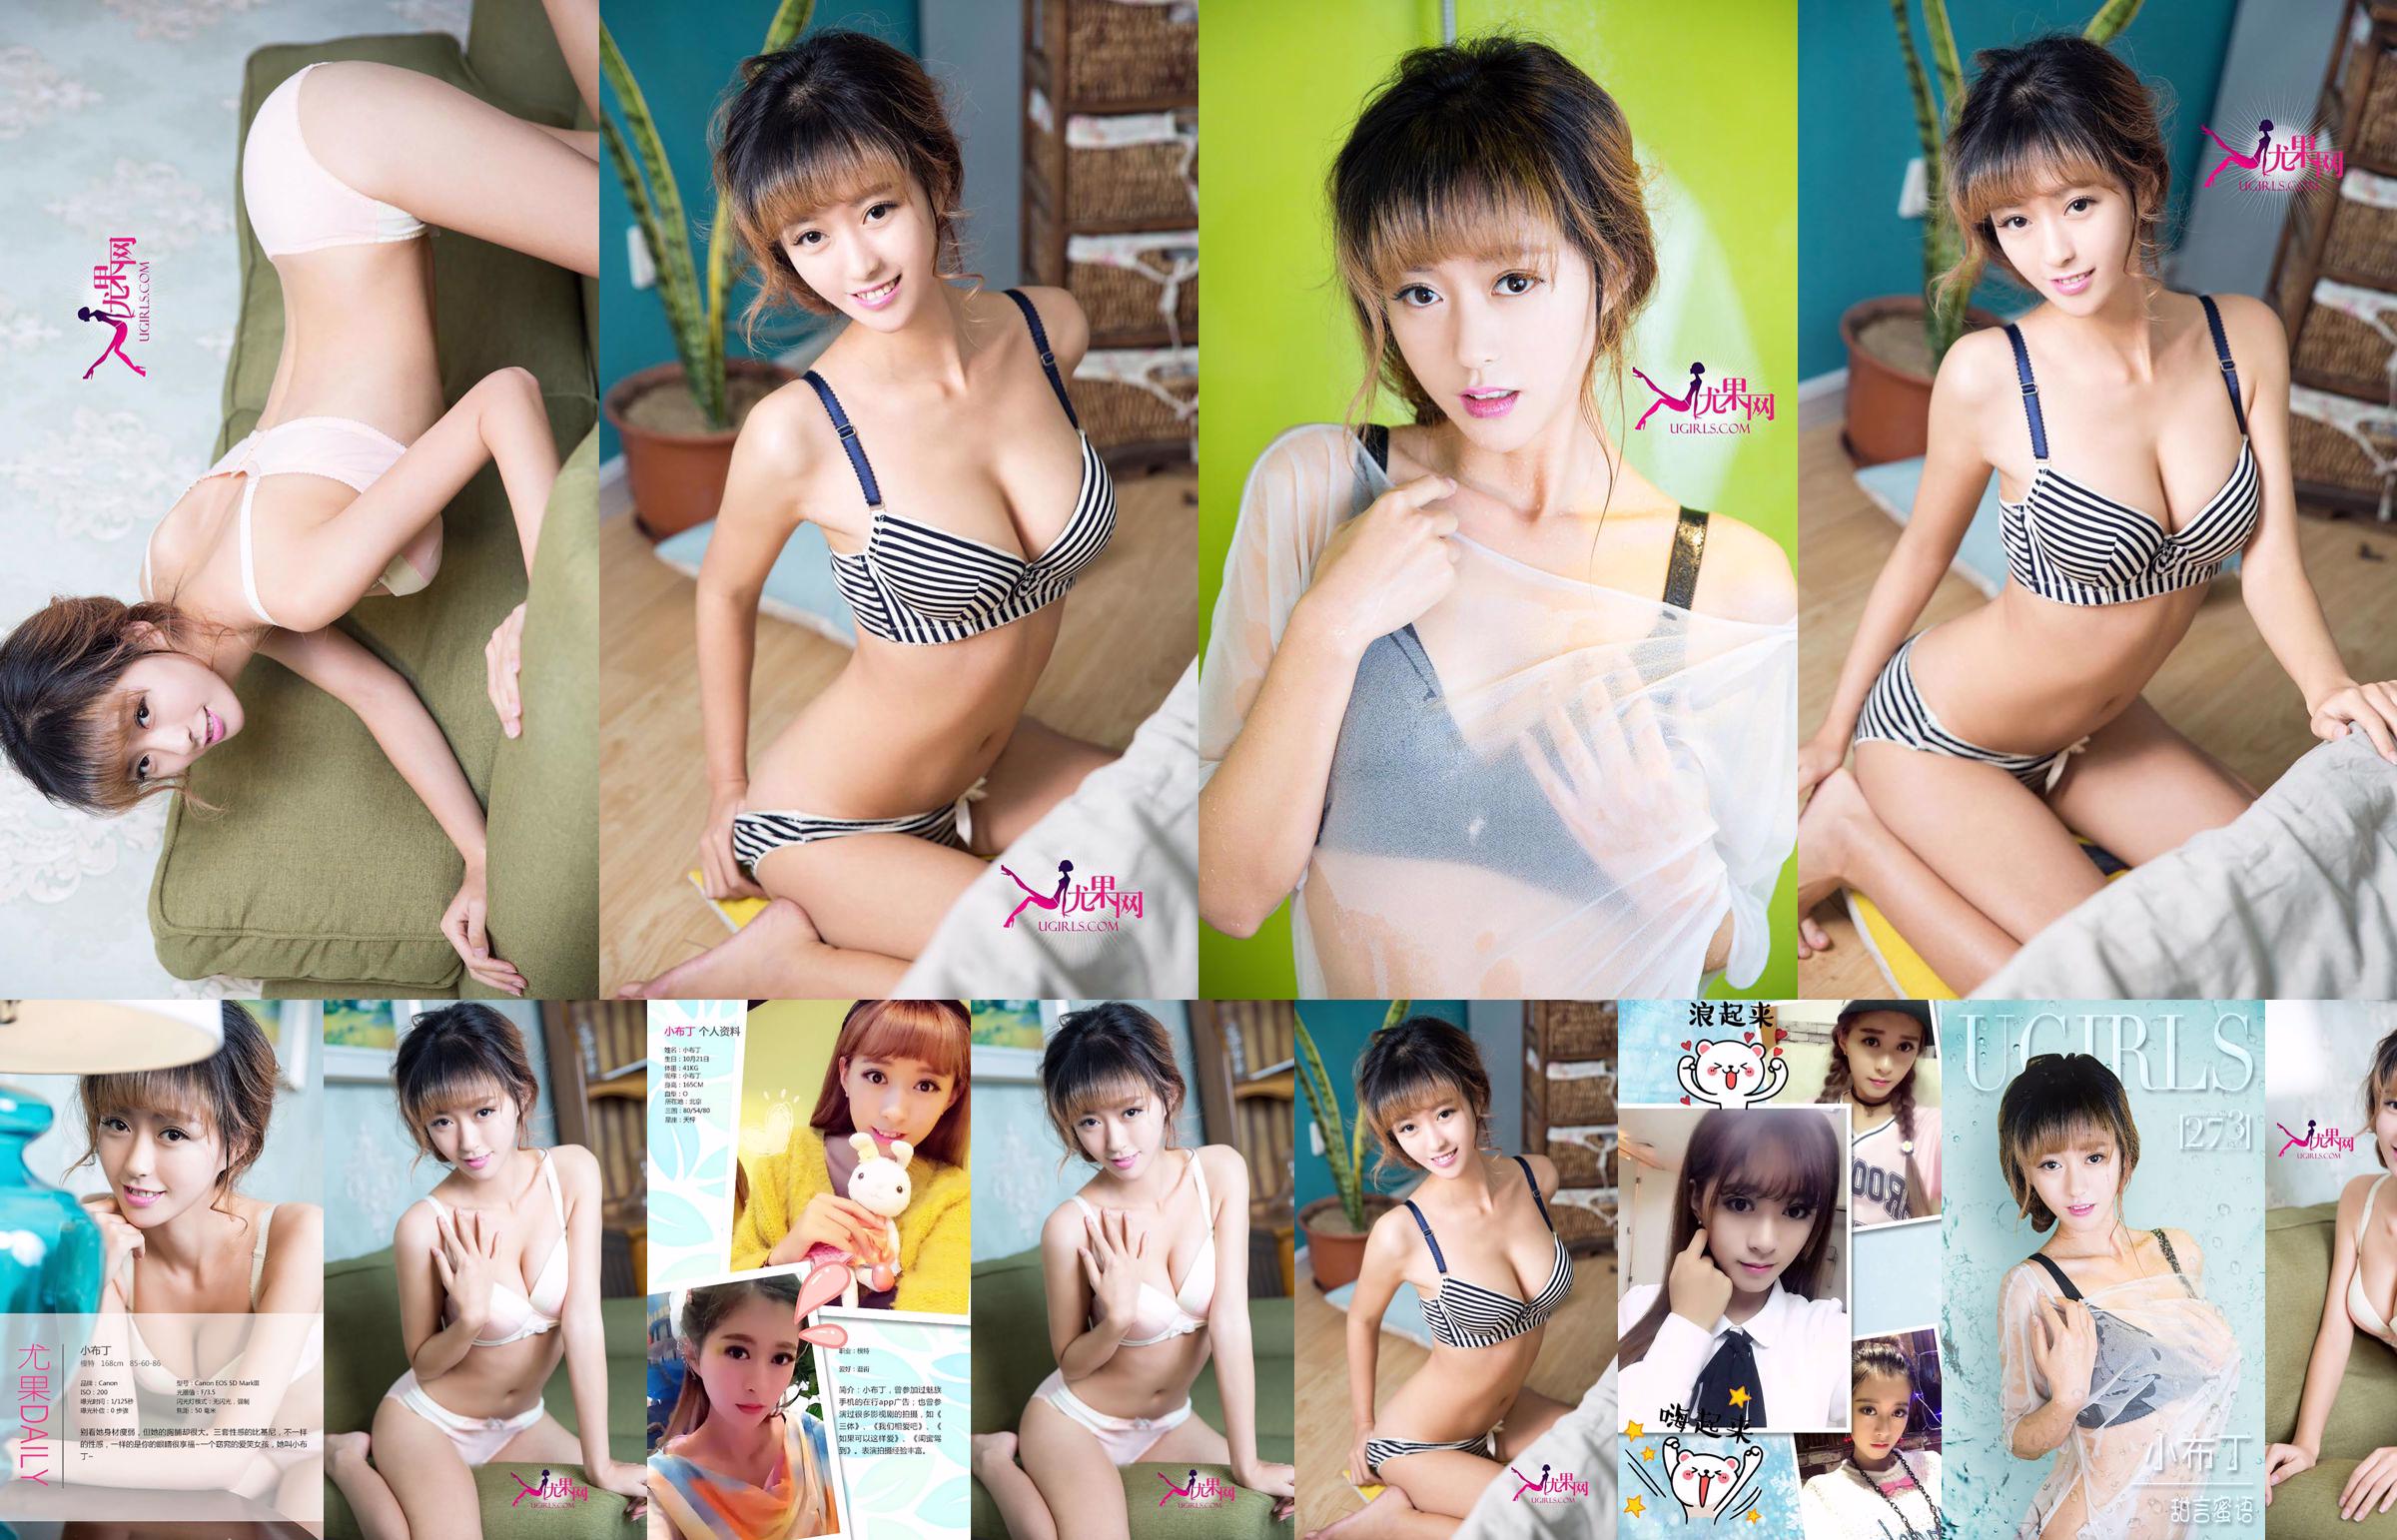 You Unana "Red Underwear + Swimsuit + One-piece Stockings" [Green Beans Guest] No.731af9 Page 2